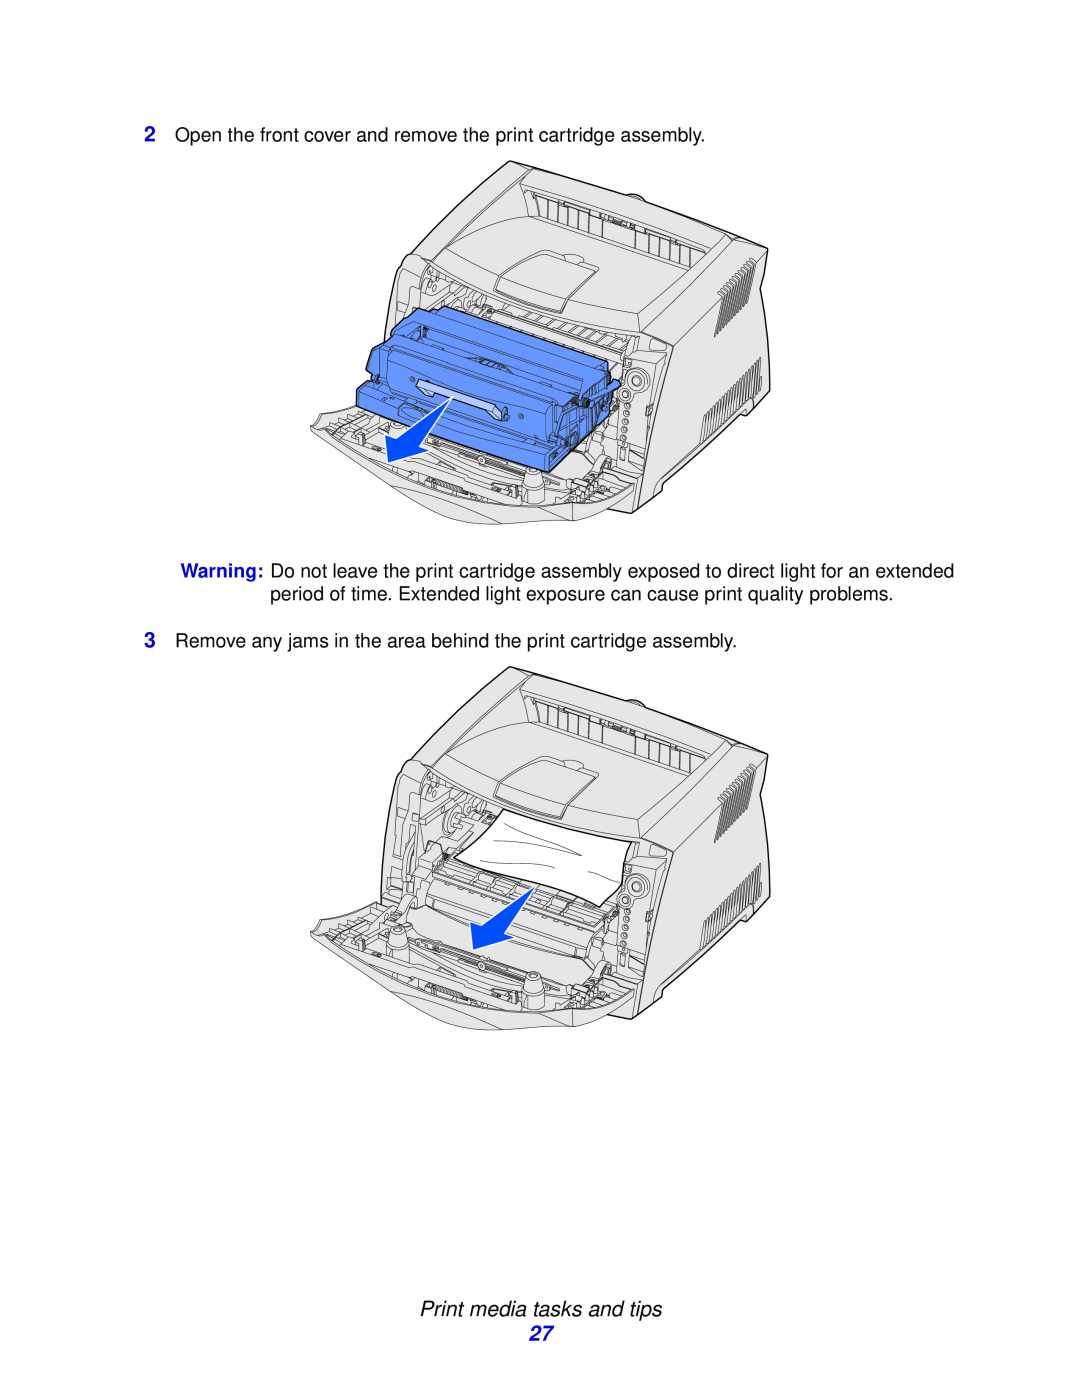 Lexmark 232, E332n, 230 manual Print media tasks and tips, Open the front cover and remove the print cartridge assembly 